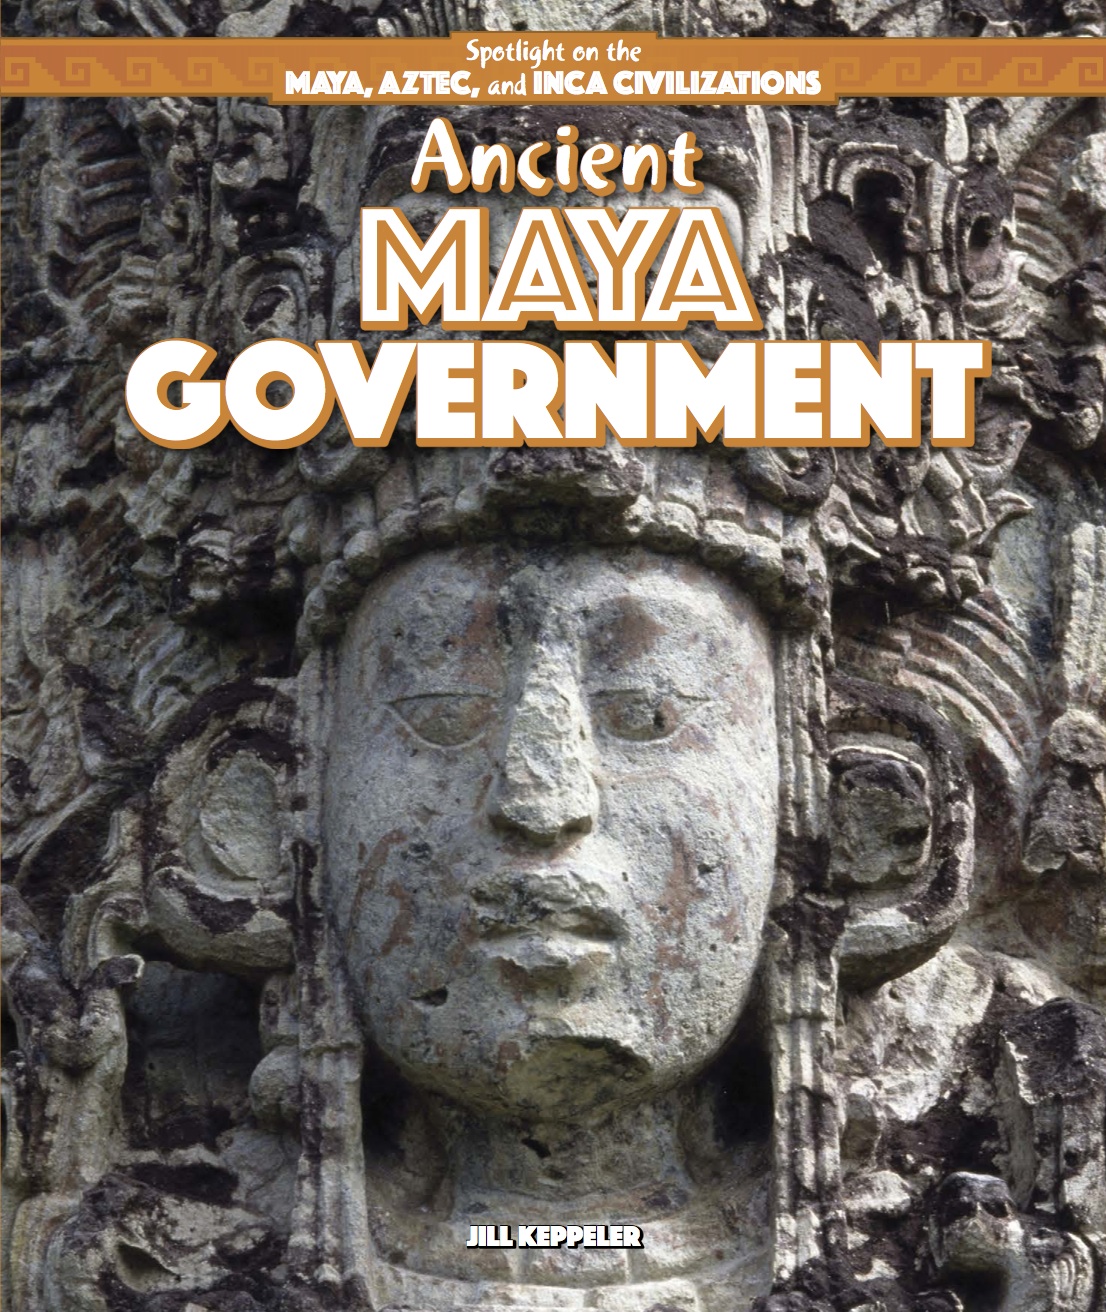 The Mayans Developed a Calendar, Mathematics and Astronomy Mayan History  Books Grade 4 Children's Ancient History (Paperback) 